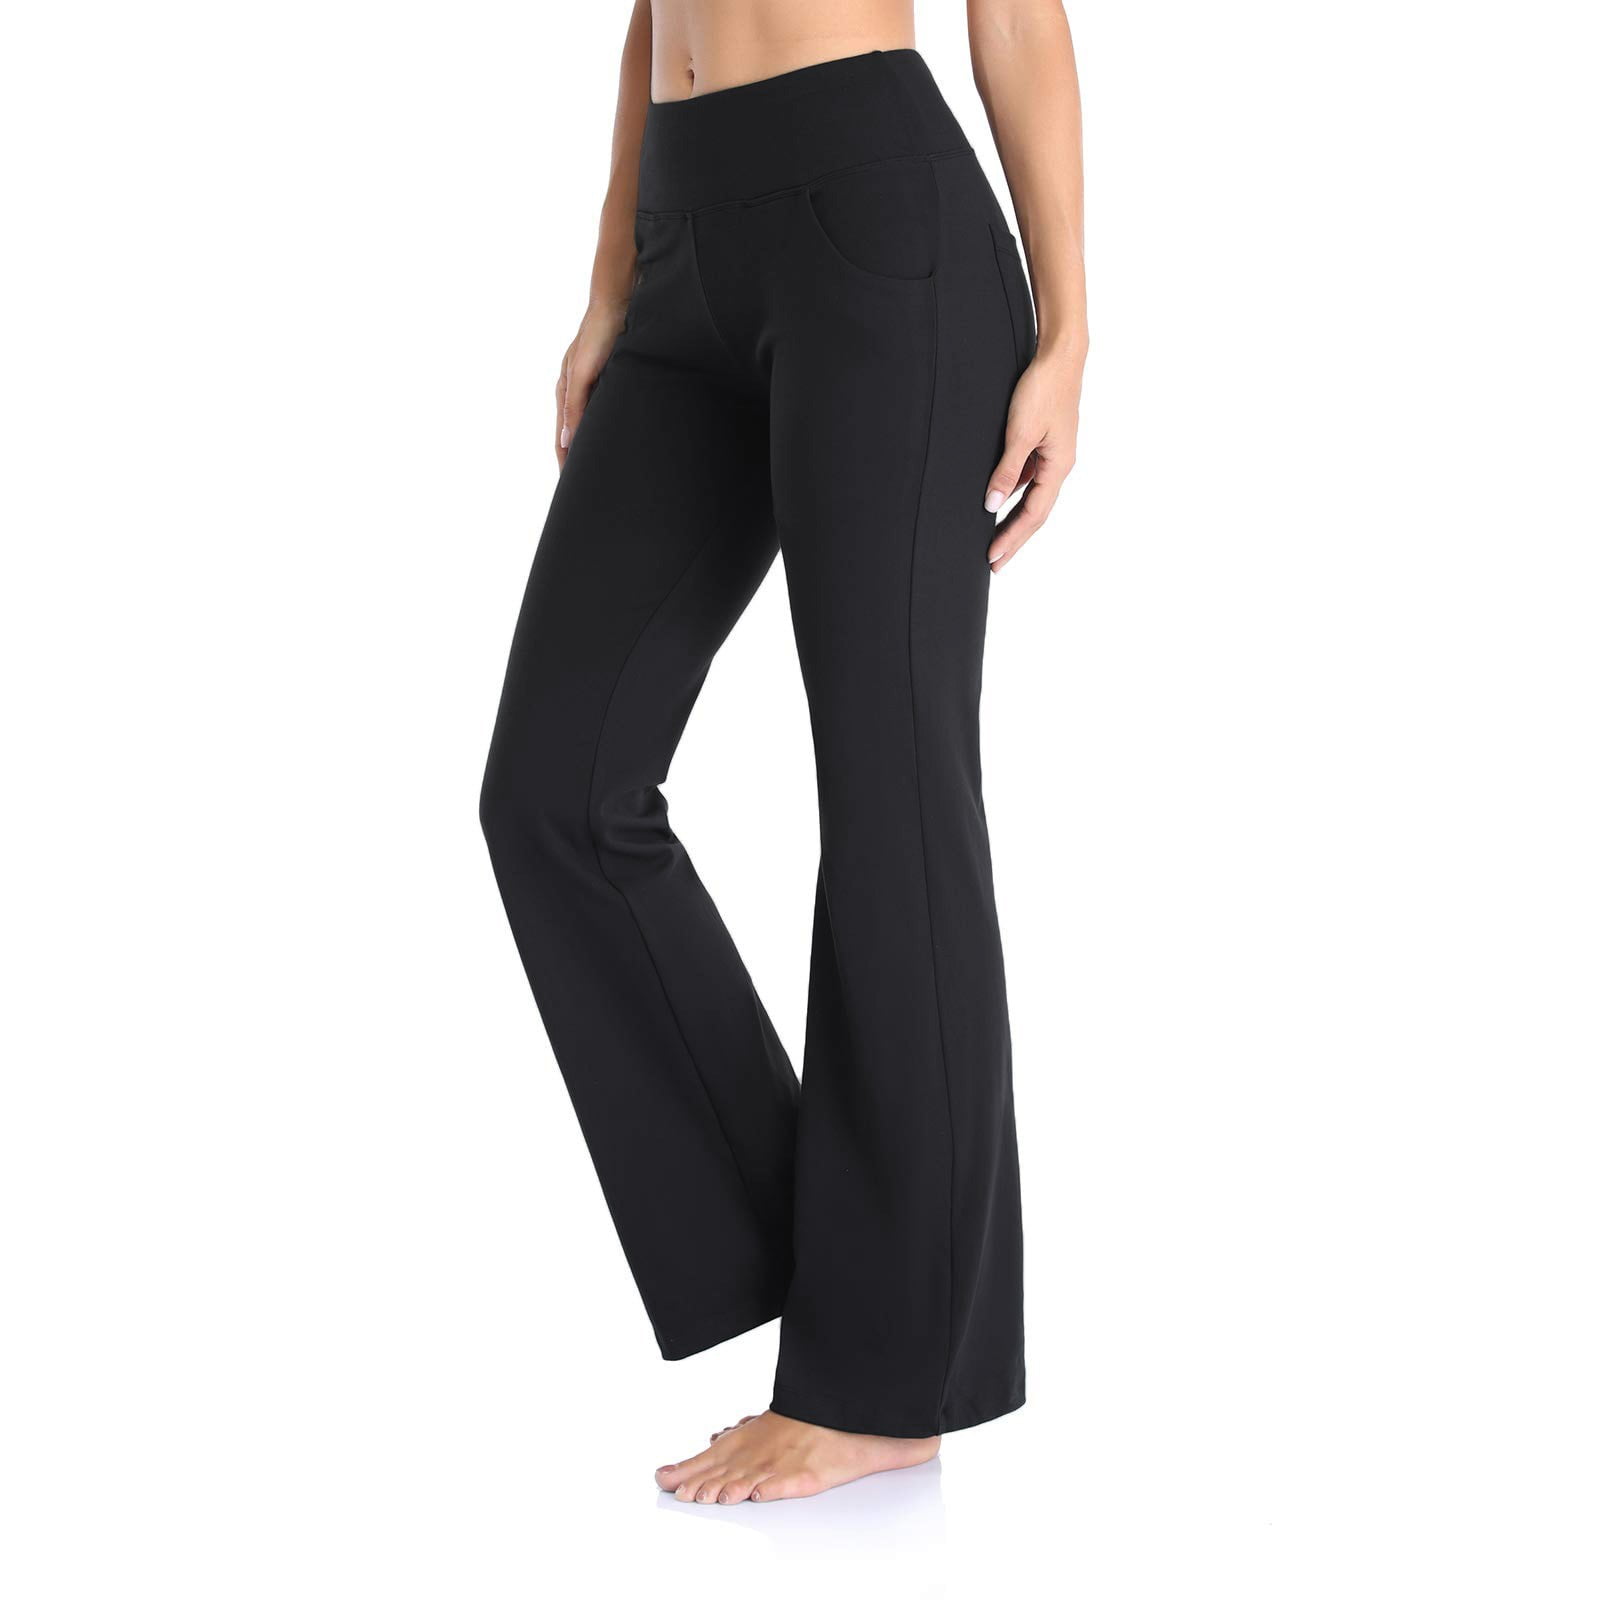 WANYNG yoga pants for women Women Yoga Pants High Waist Flare Leggings Wide Straight  Leg Sports Trousers Flared Trousers With Pocket For Yoga Pilates Fitness  Polyester Black XL 